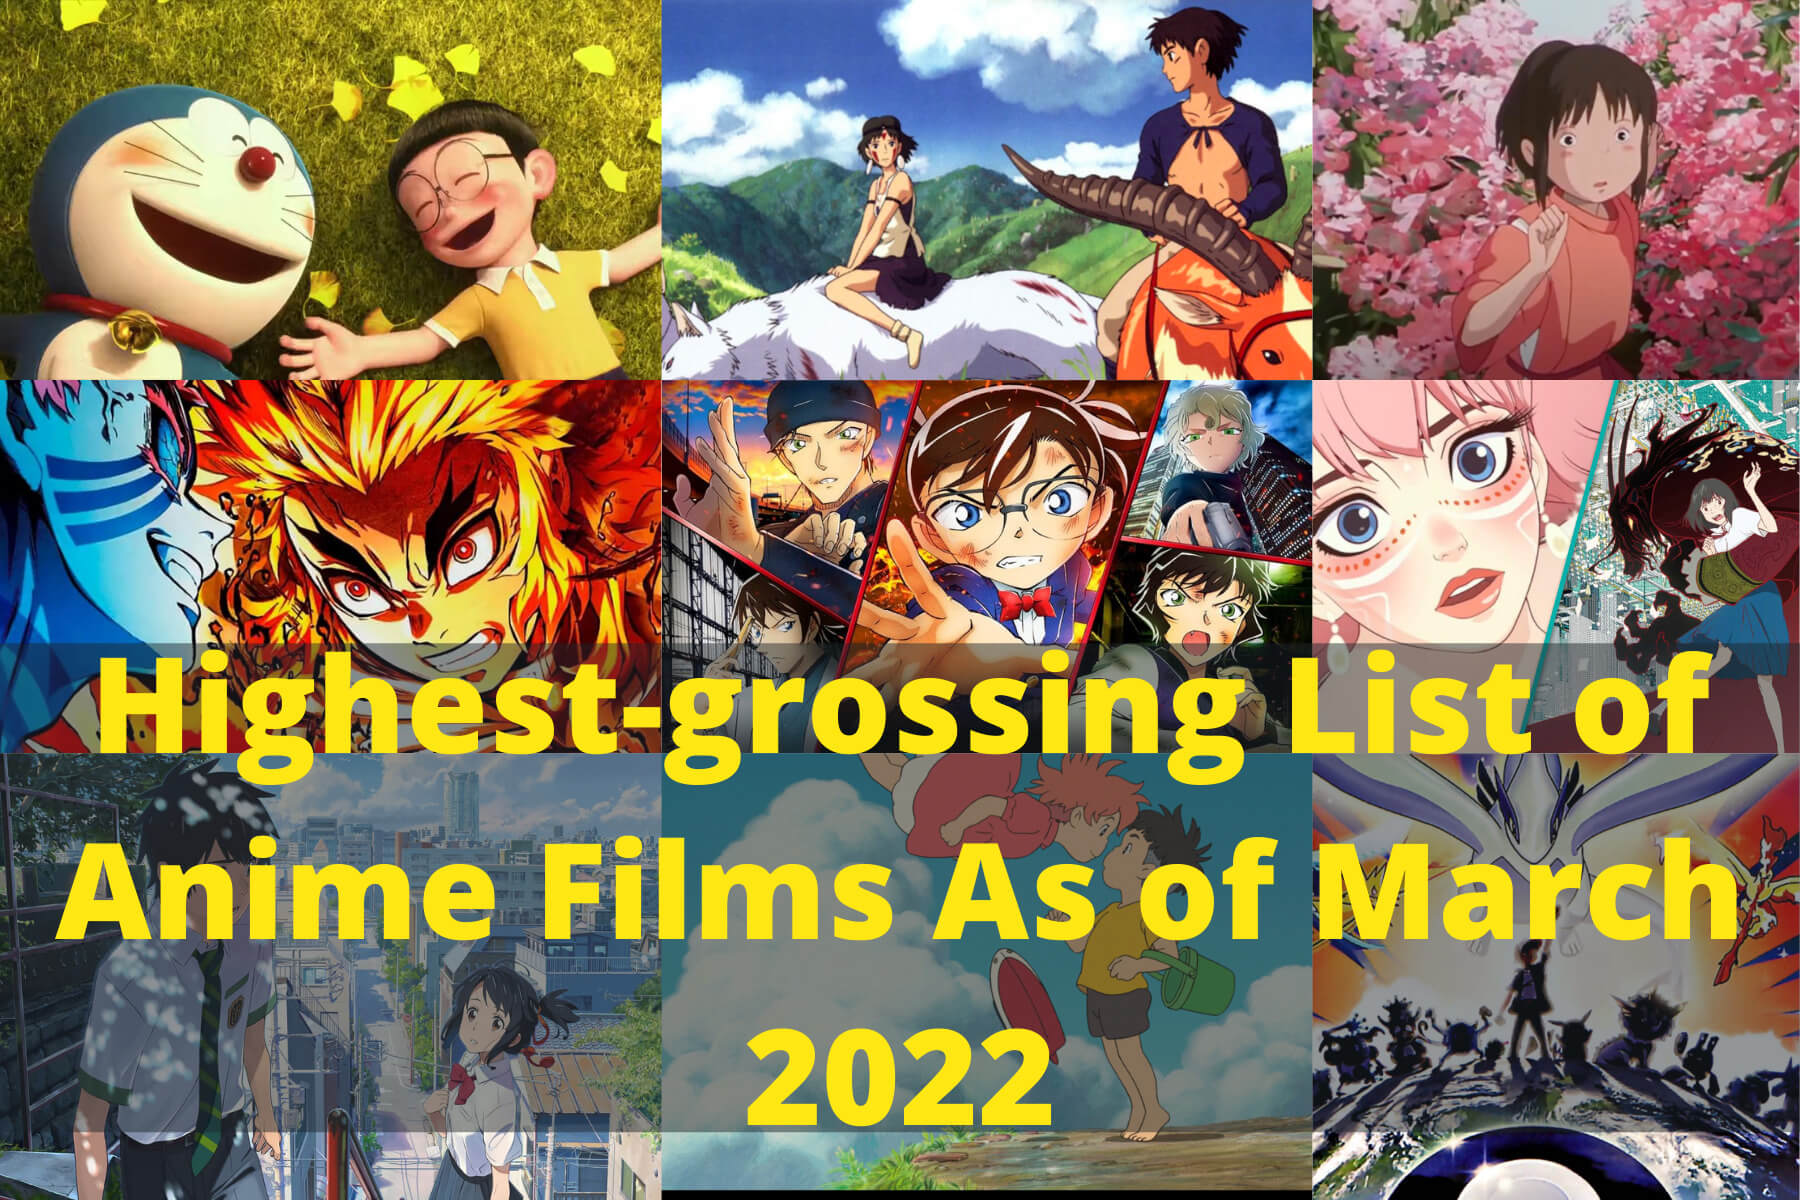 Highest-grossing List of Anime Films As of March 2022